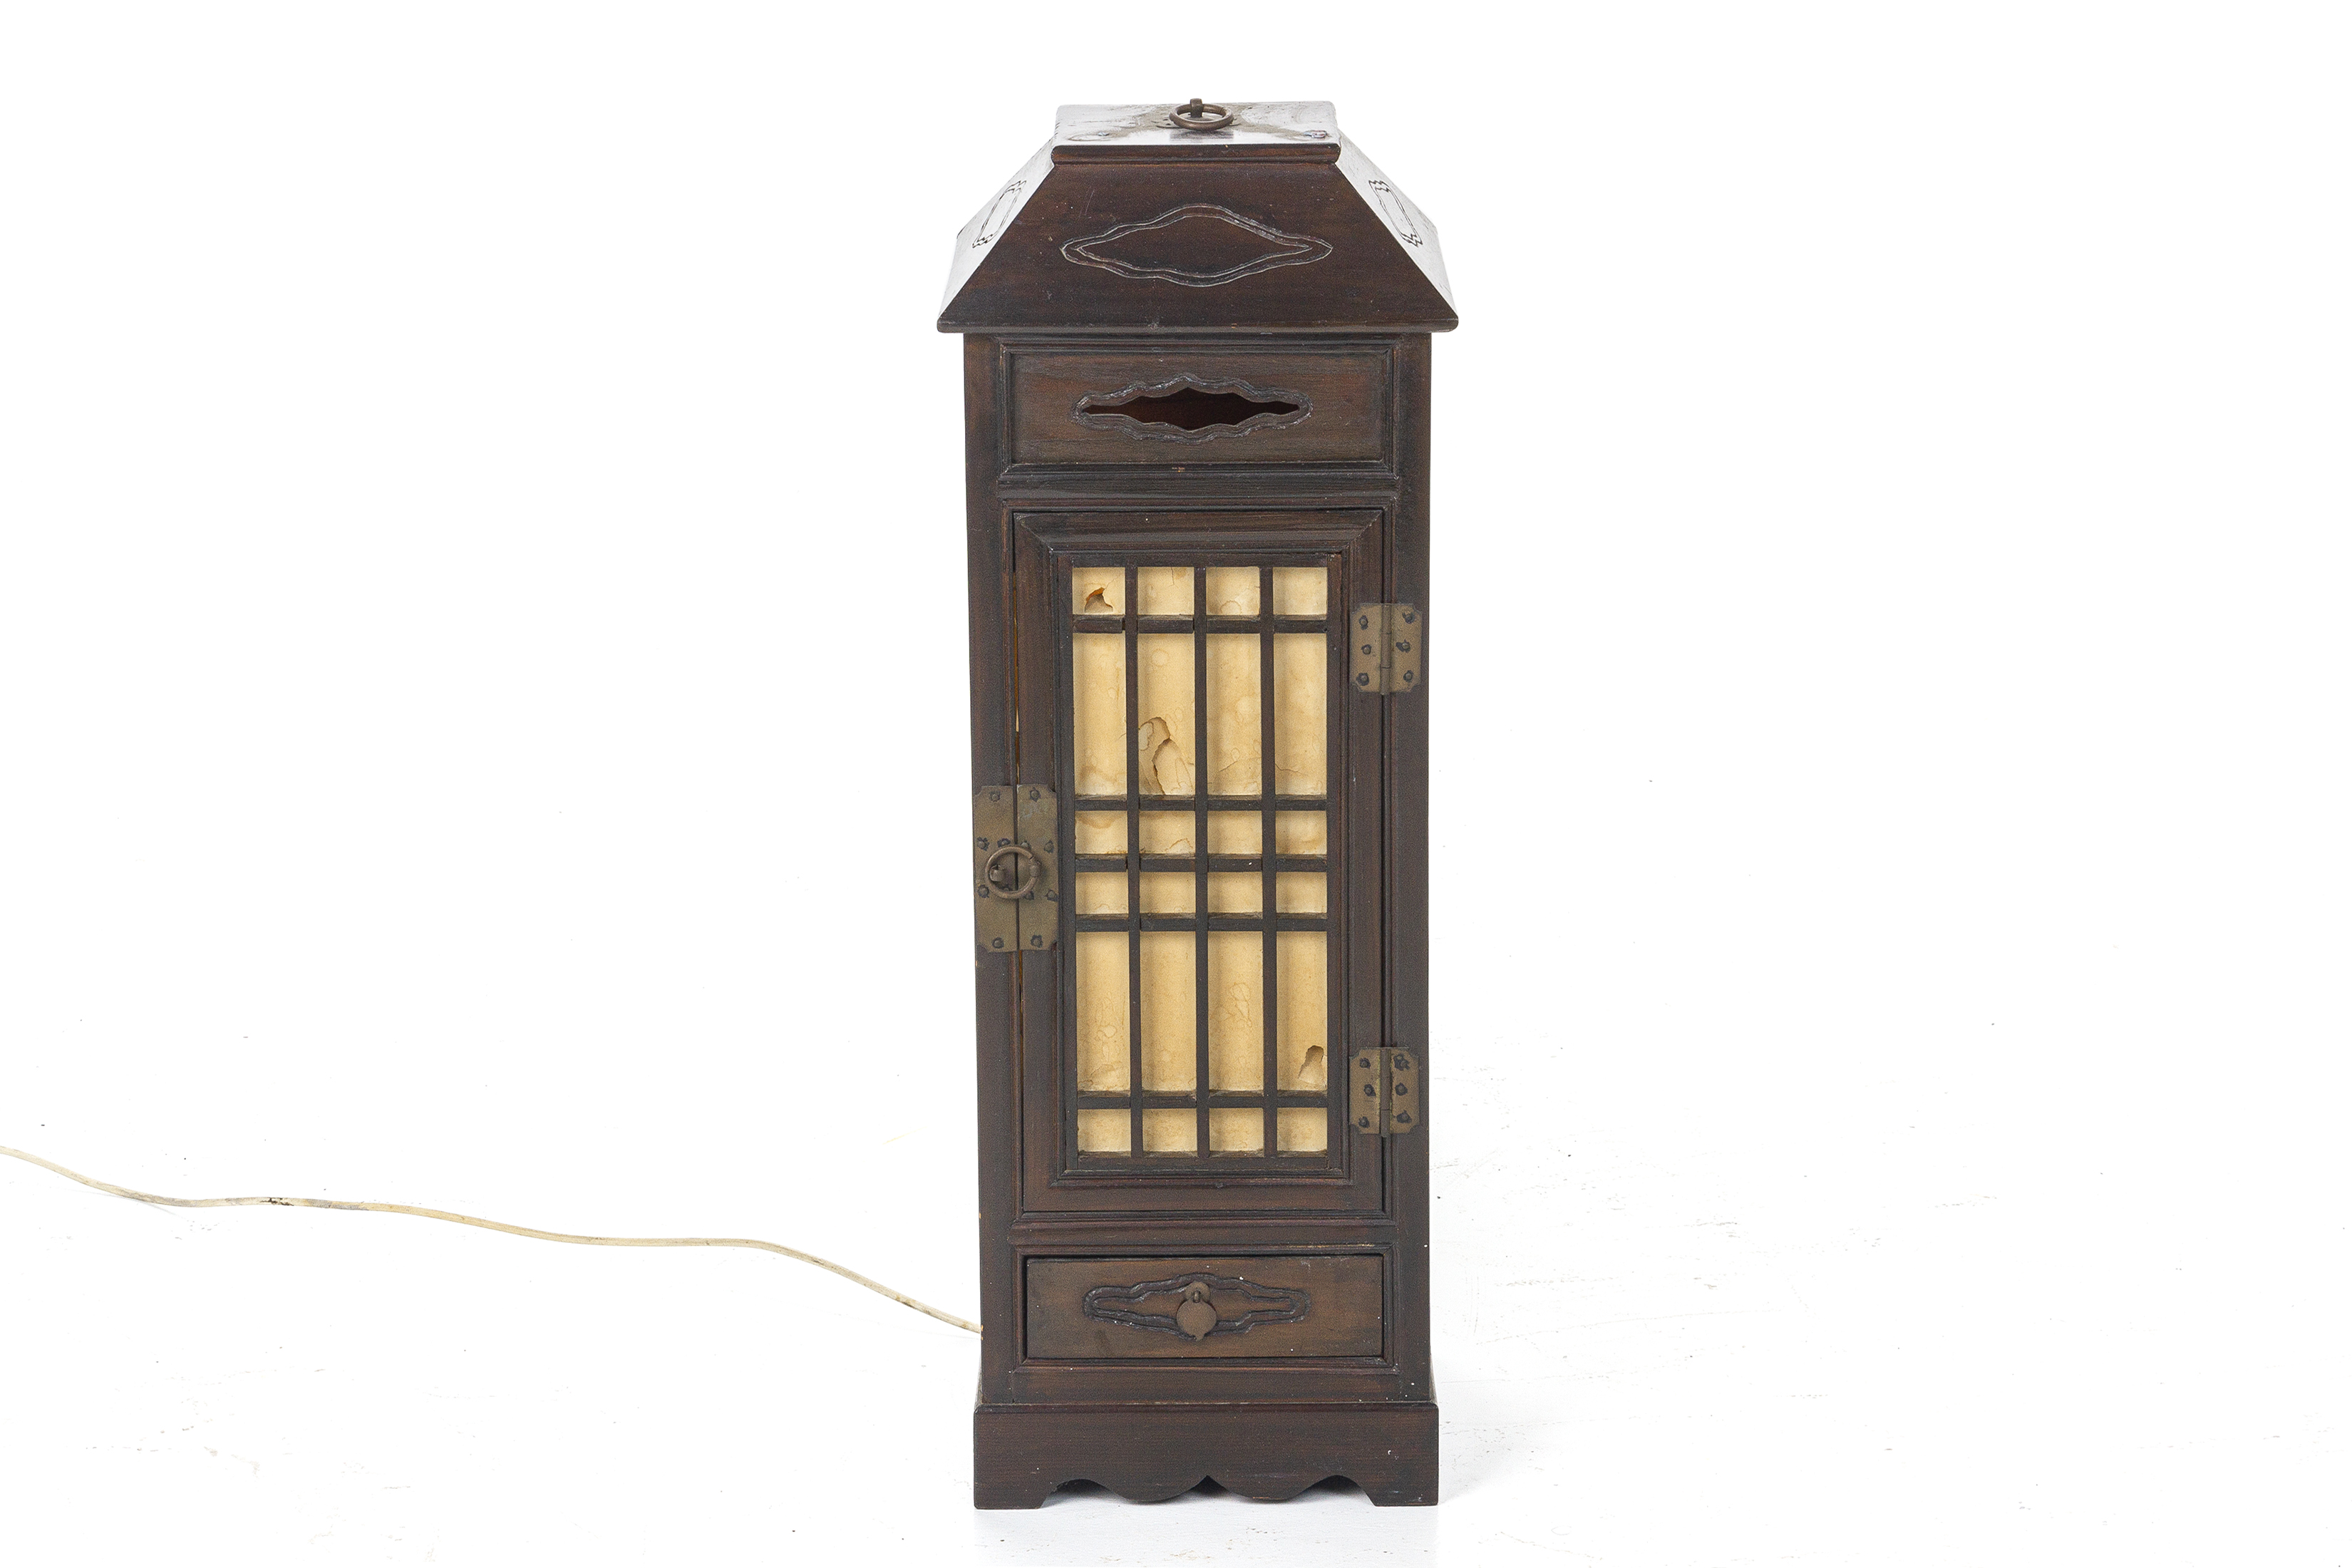 A SQUARE SECTION WOOD FLOOR LANTERN - Image 2 of 4